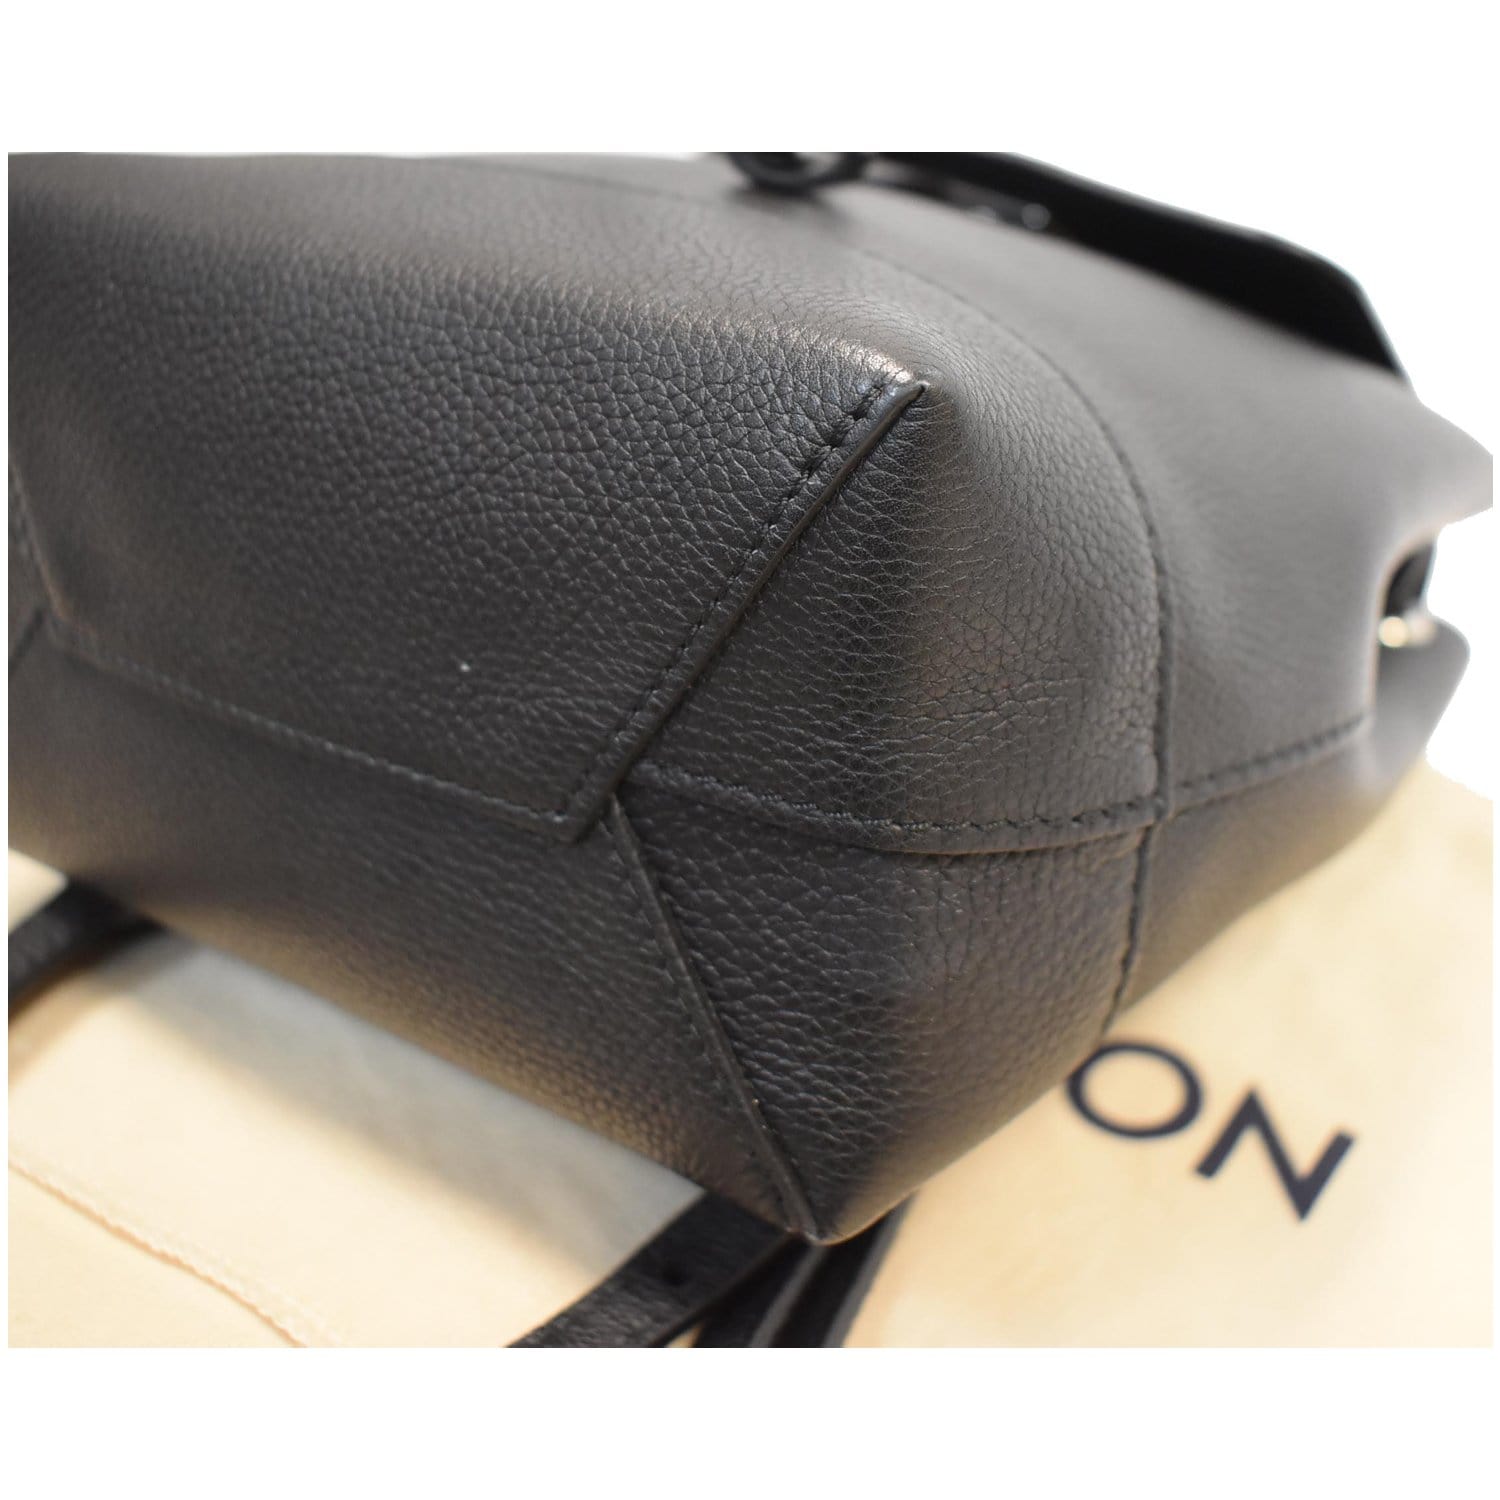 Lockme leather backpack Louis Vuitton Black in Leather - 20607101